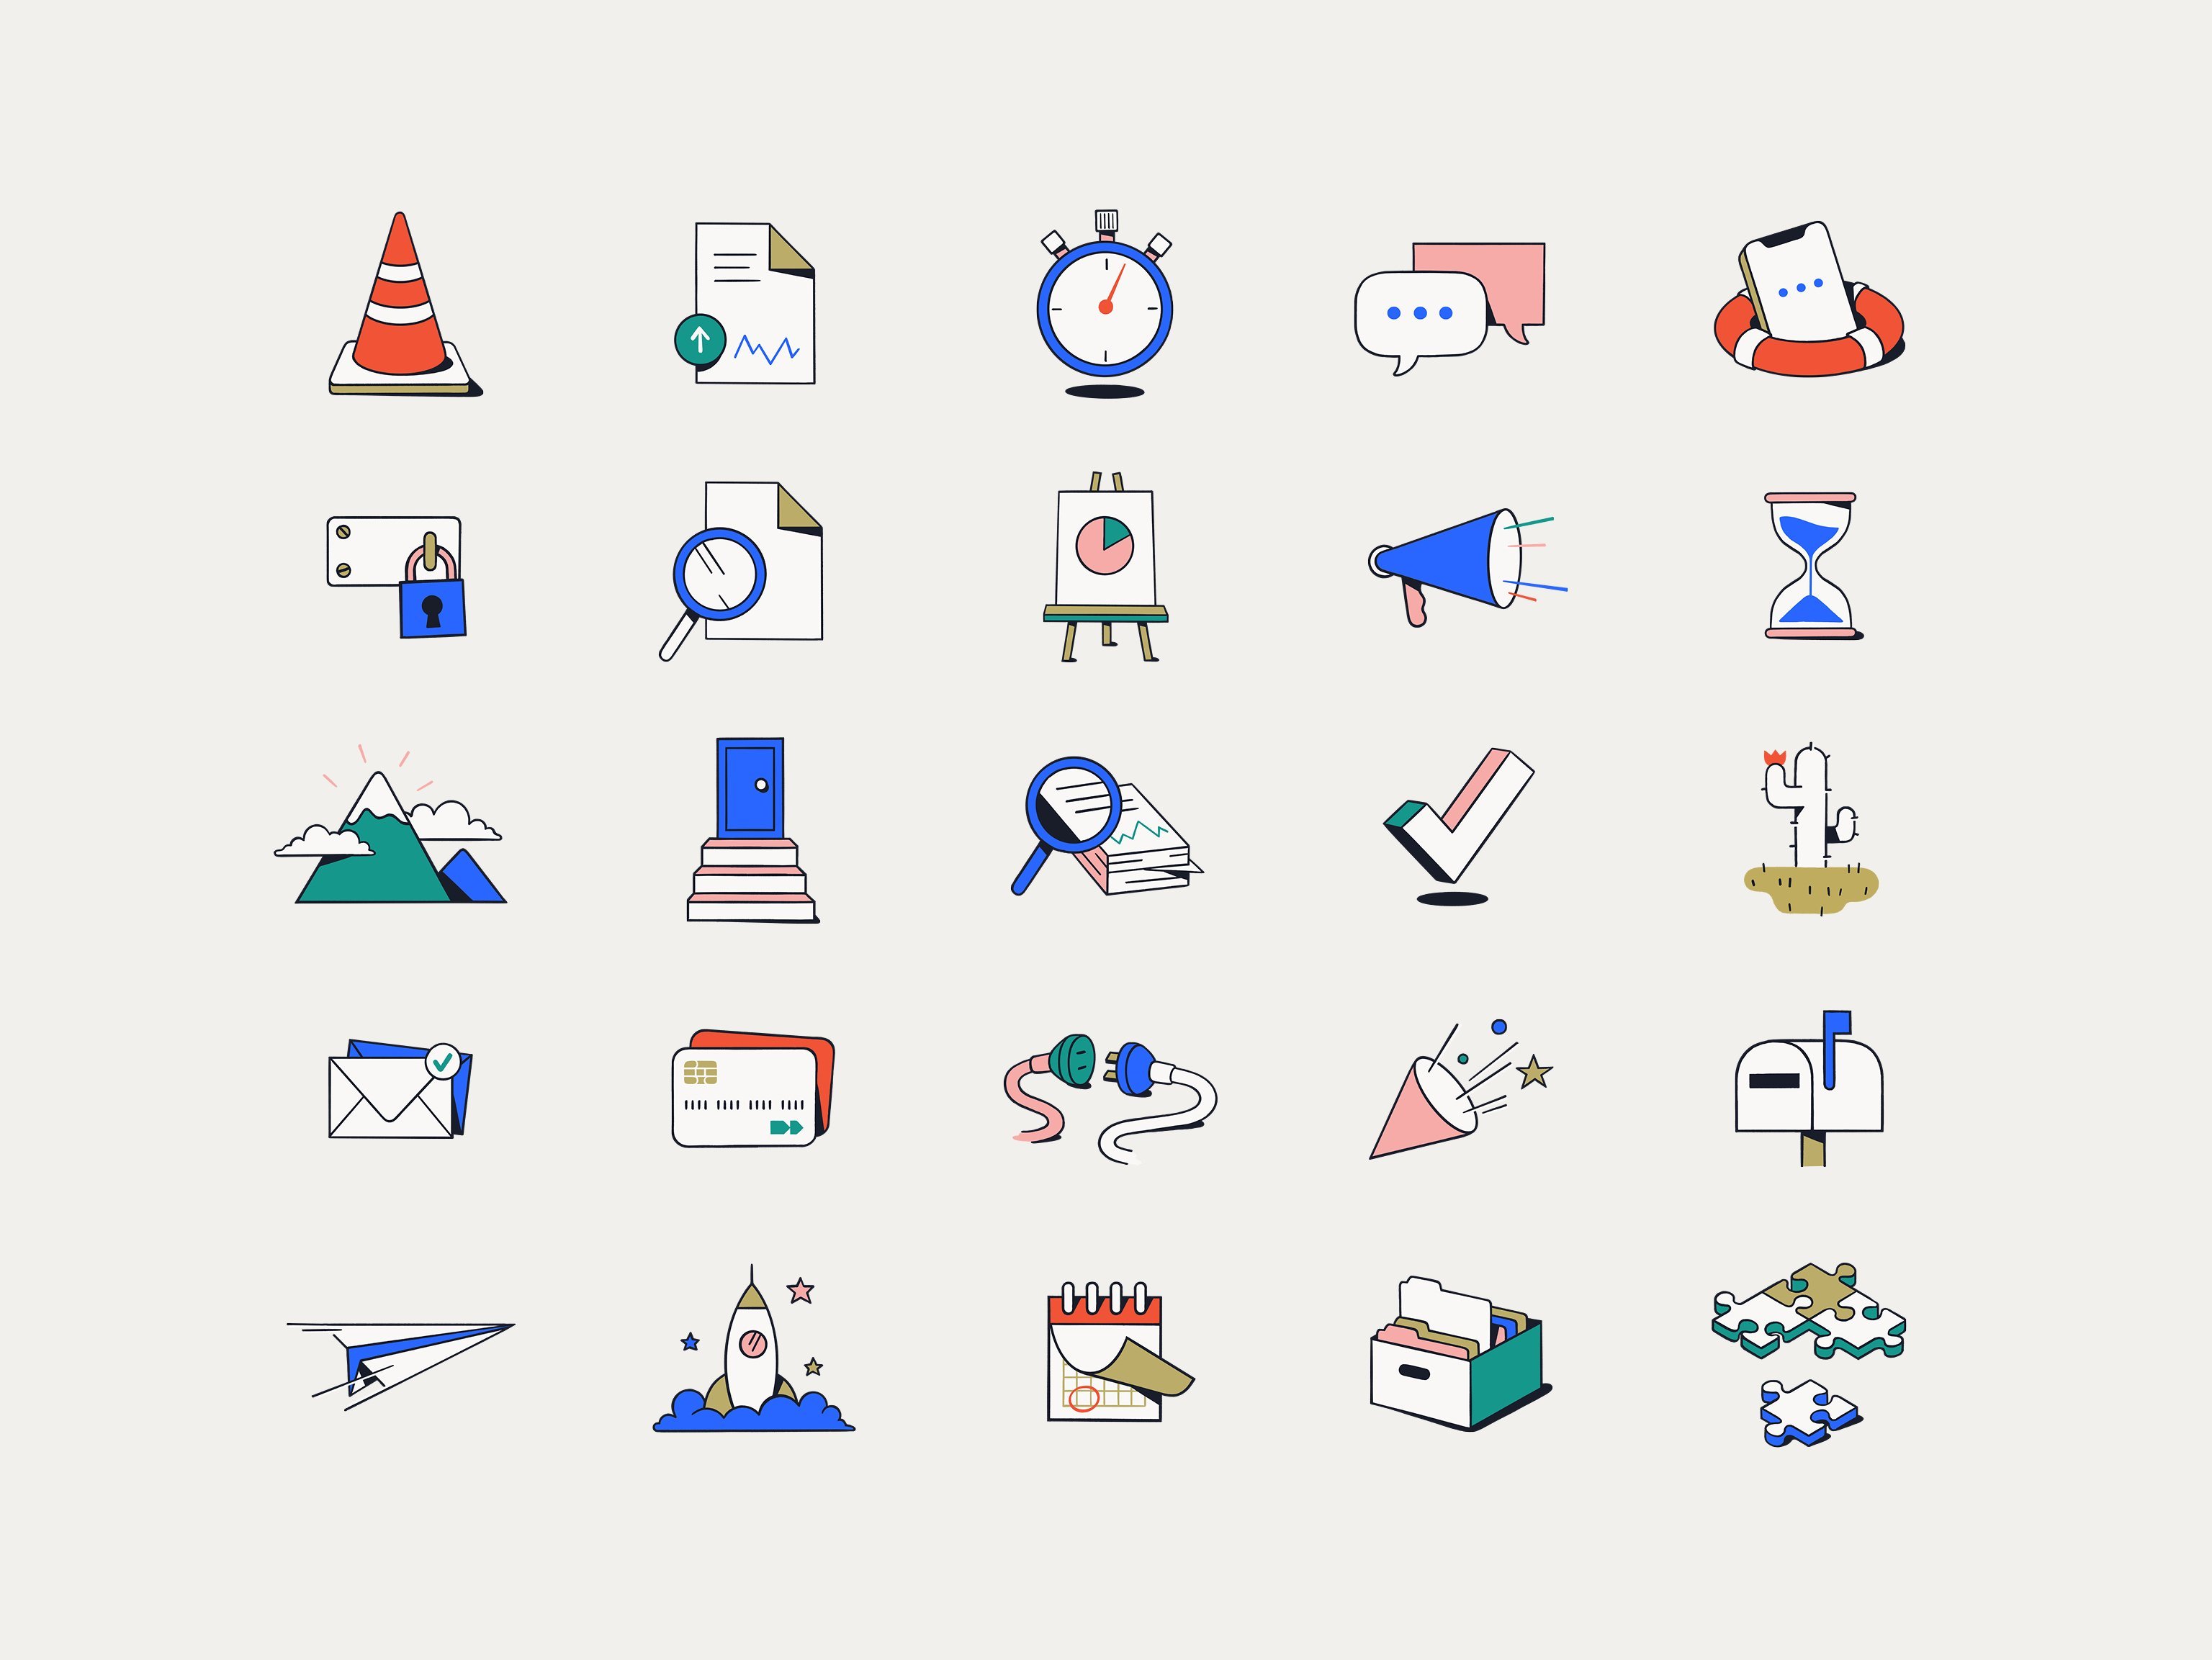 Illustration iconography for automation, analytics and customer journey company Ortto designed by Christopher Doyle & Co